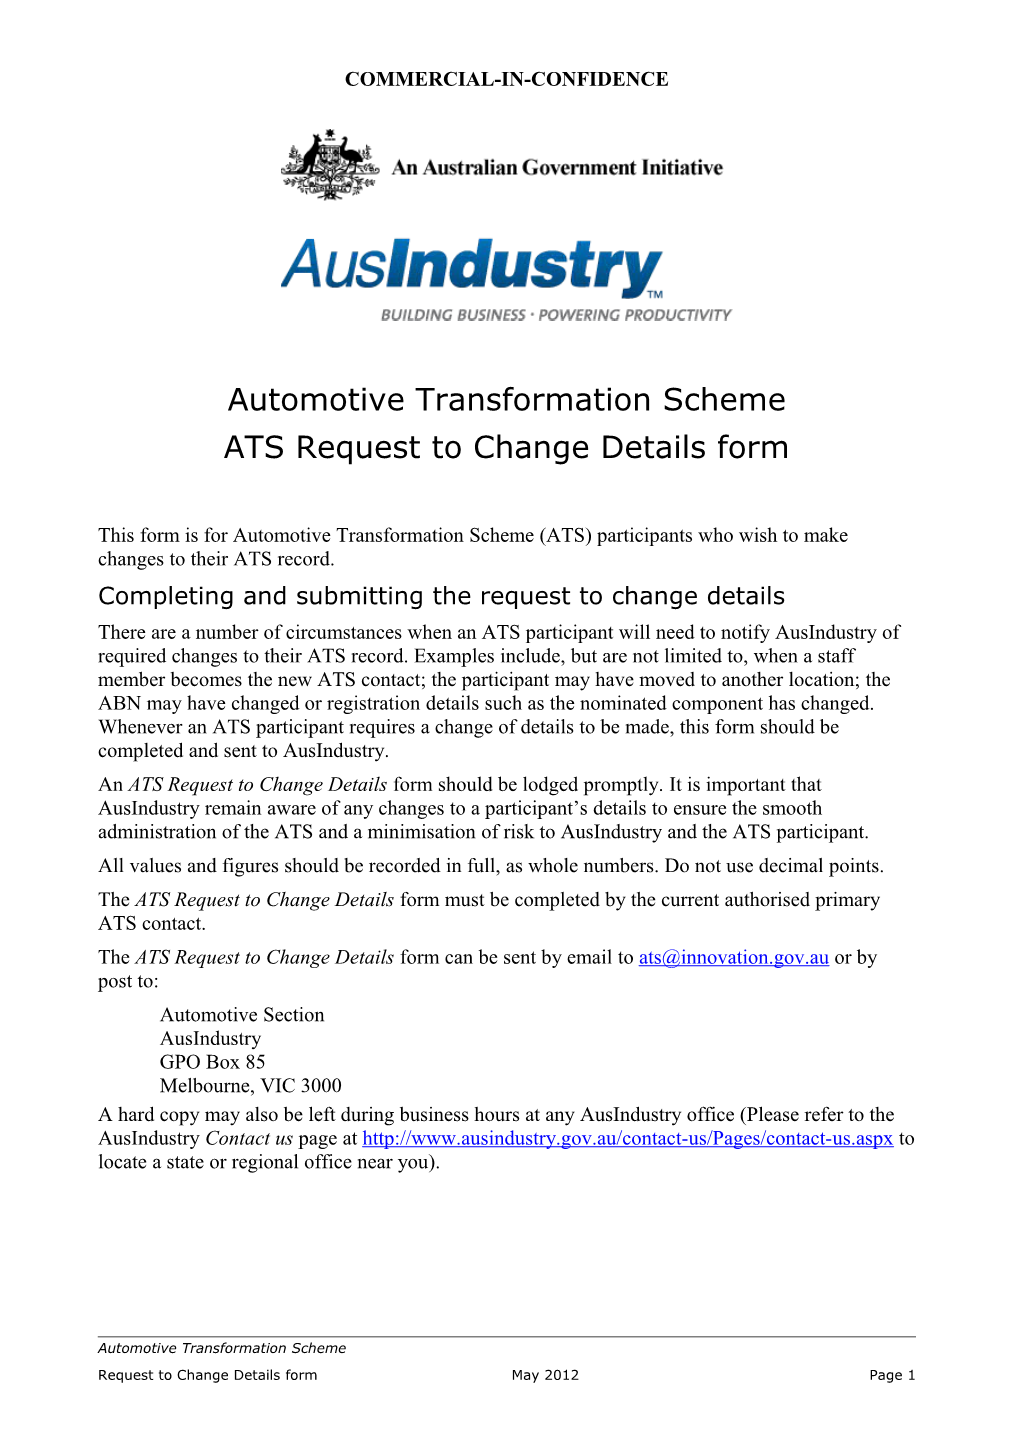 ATS Request to Change Details Form